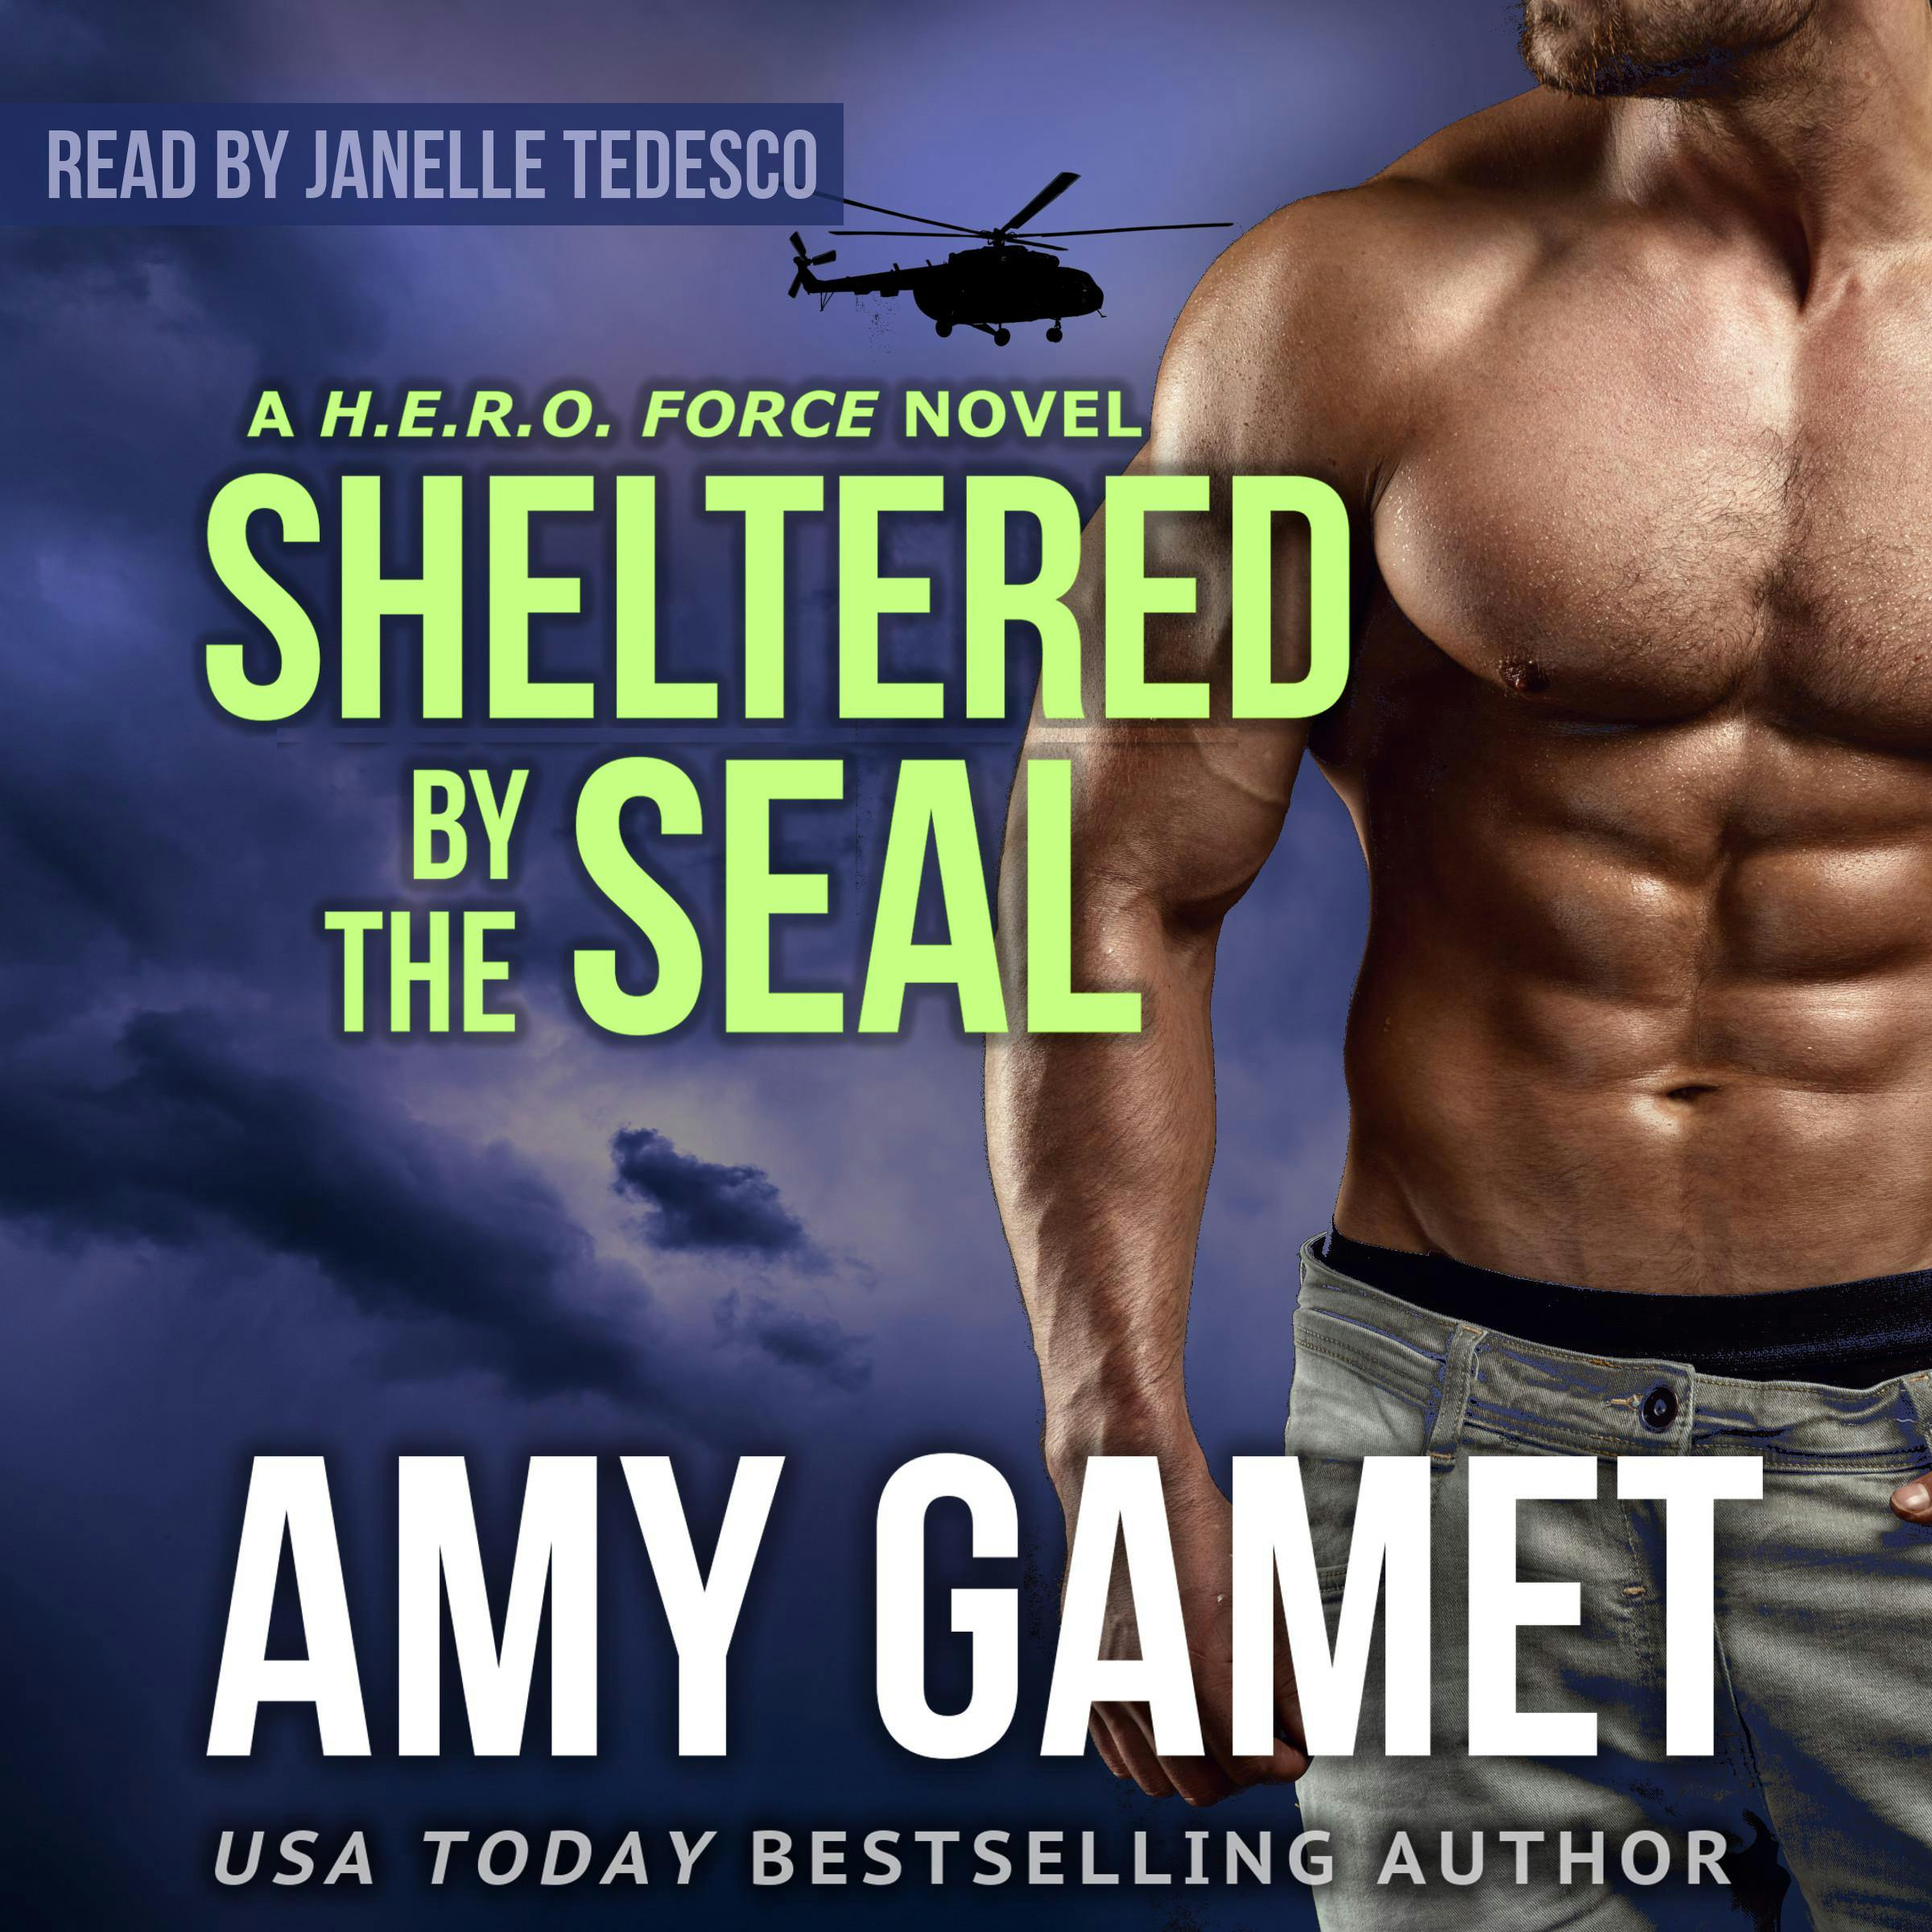 Sheltered by the SEAL - Amy Gamet